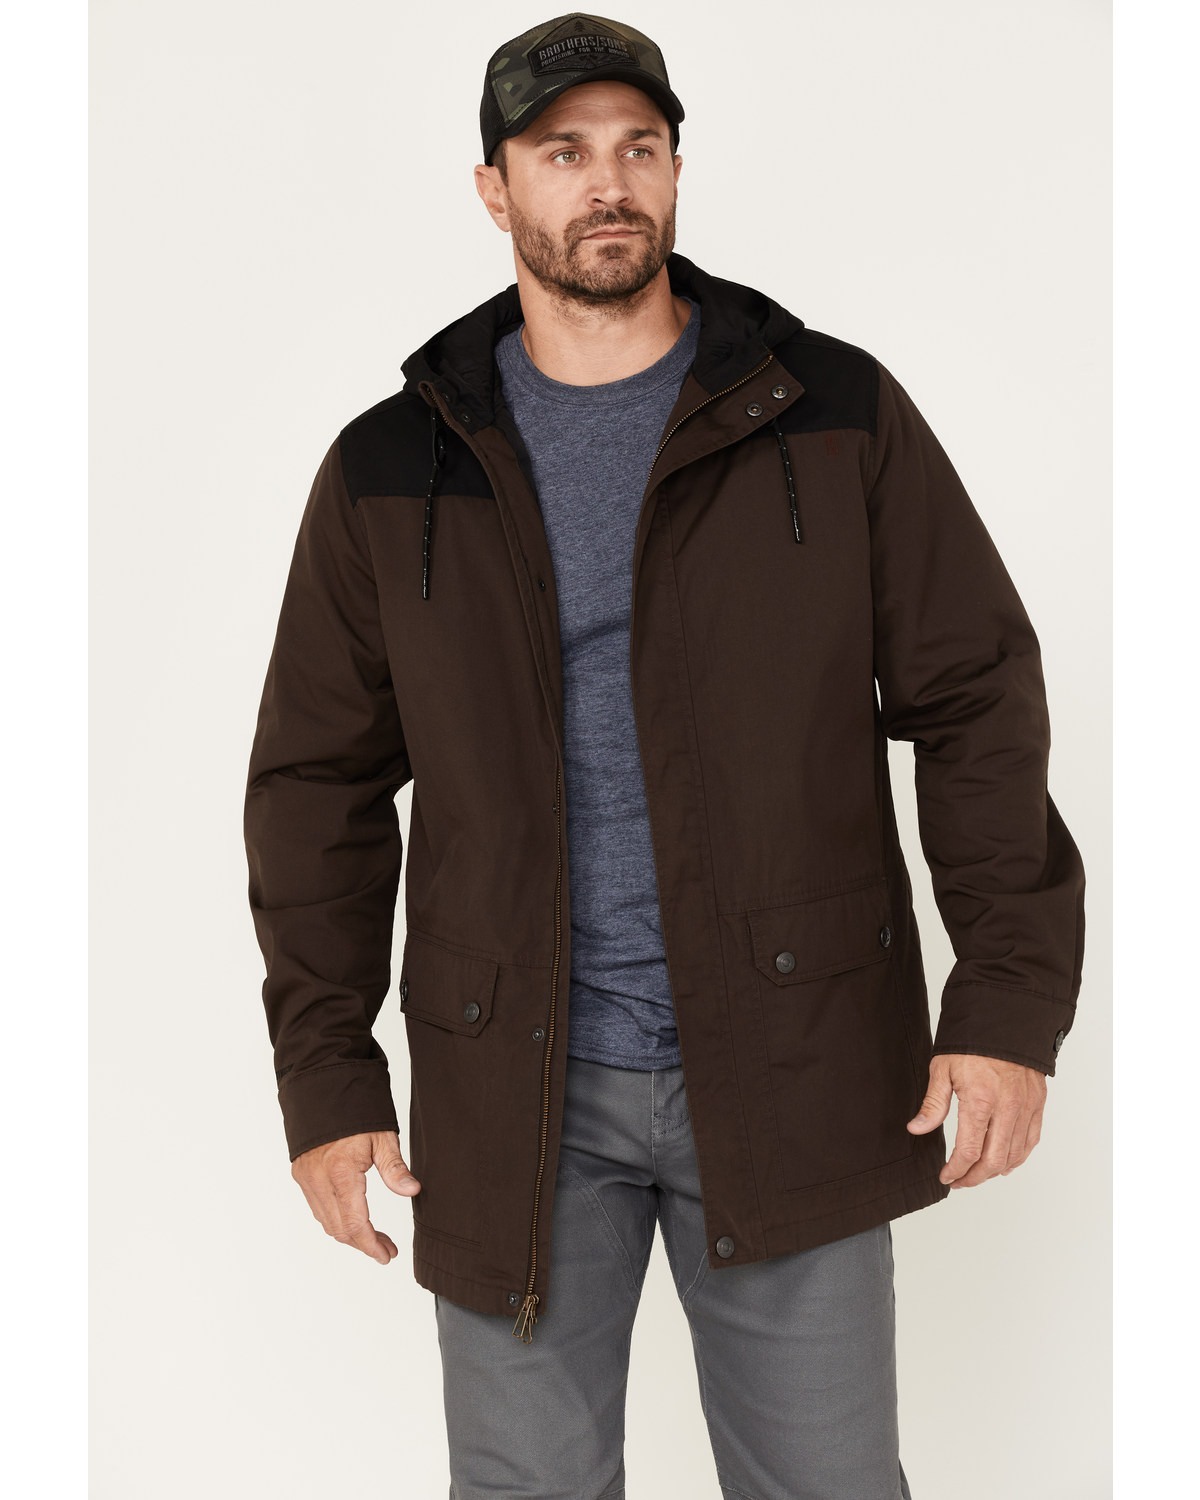 Brothers and Sons Men's Waxed Canvas Cruiser Hooded Jacket